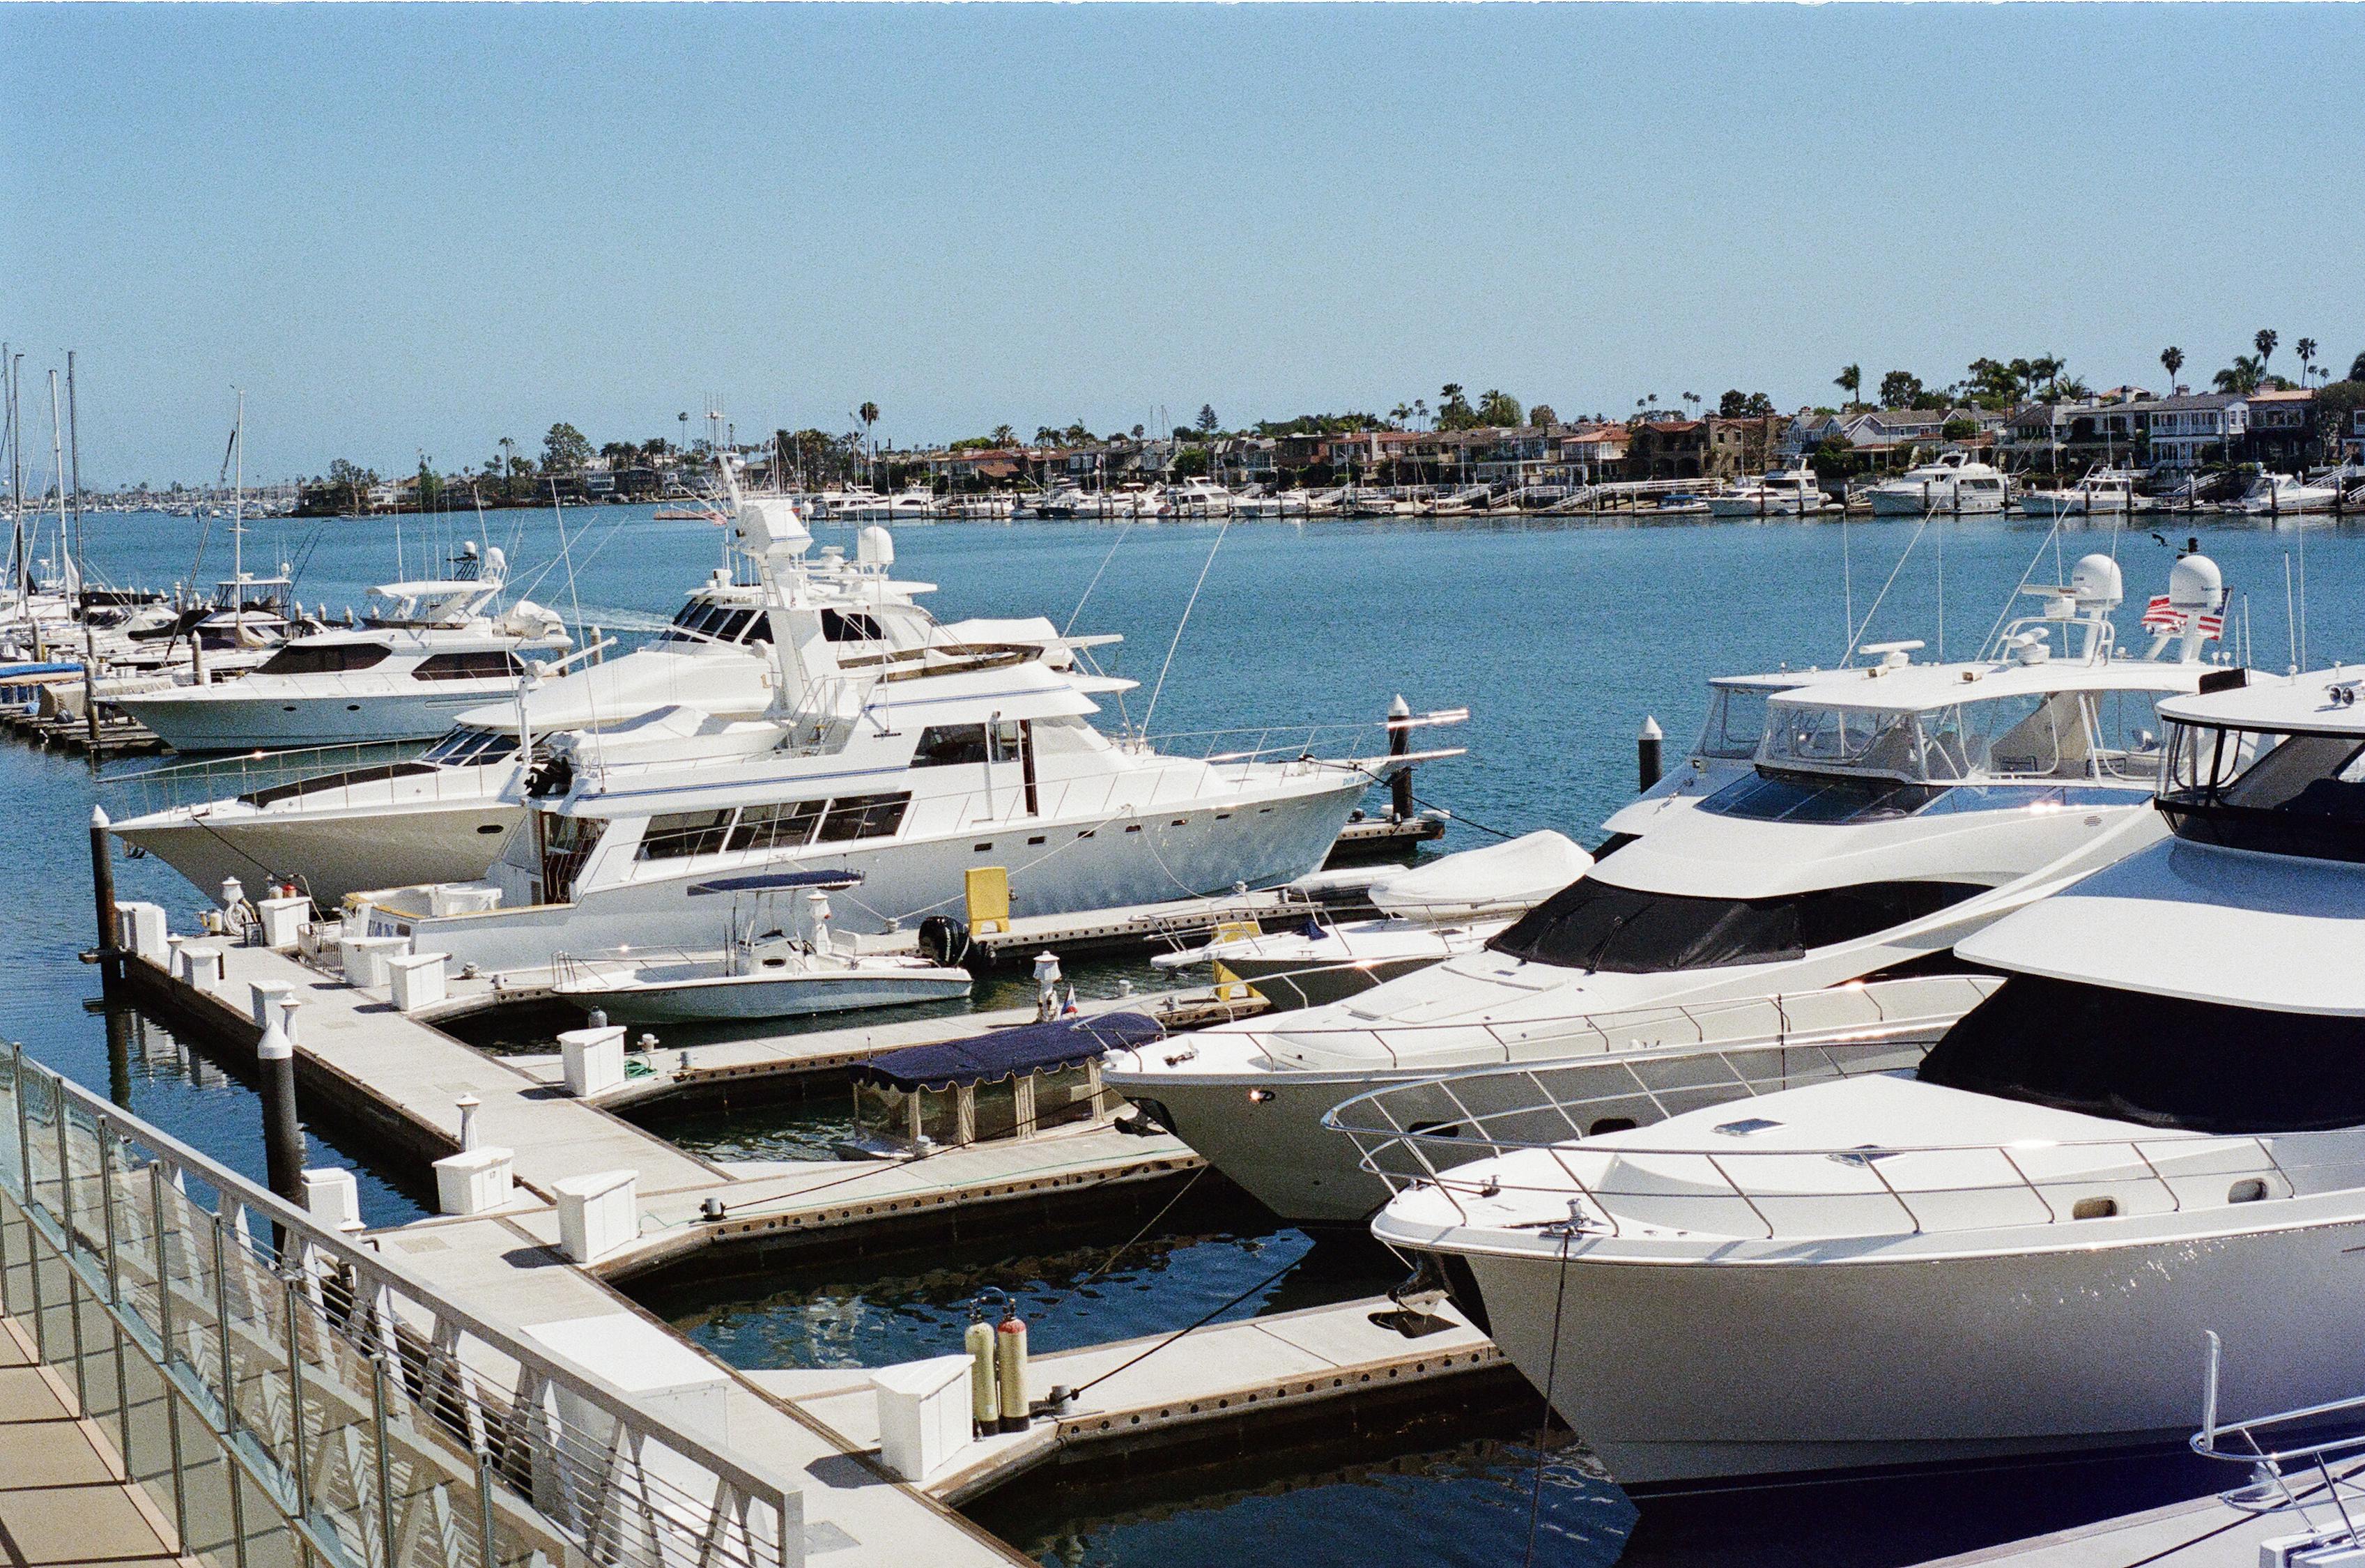 yachts in a harbour